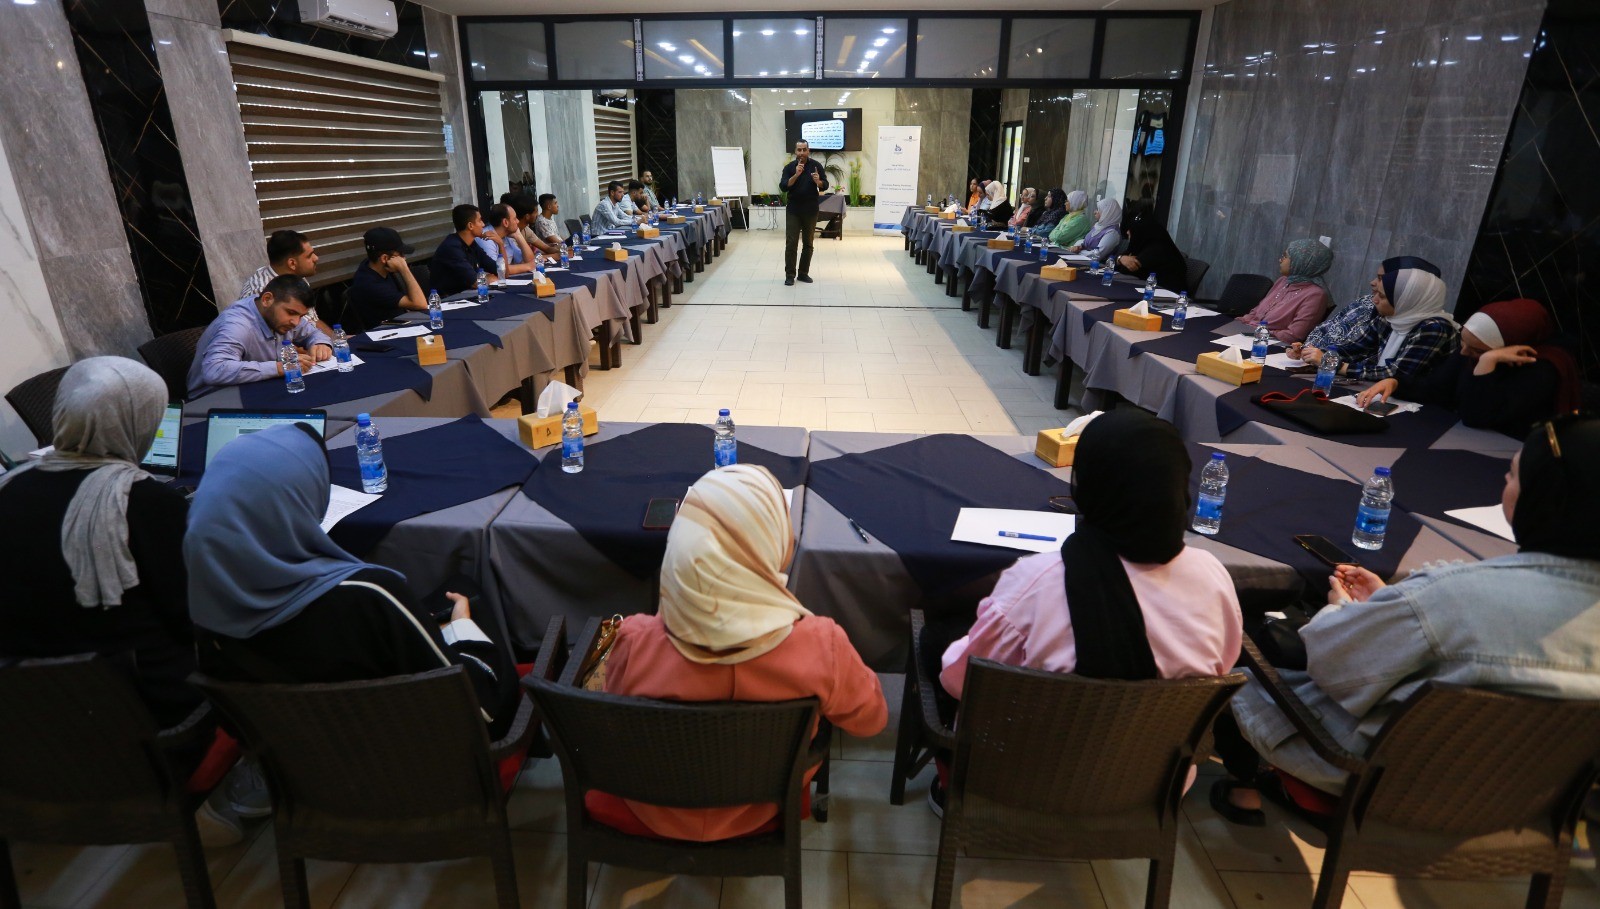 Press House holds an awareness workshop on "Artificial Intelligence Journalism"